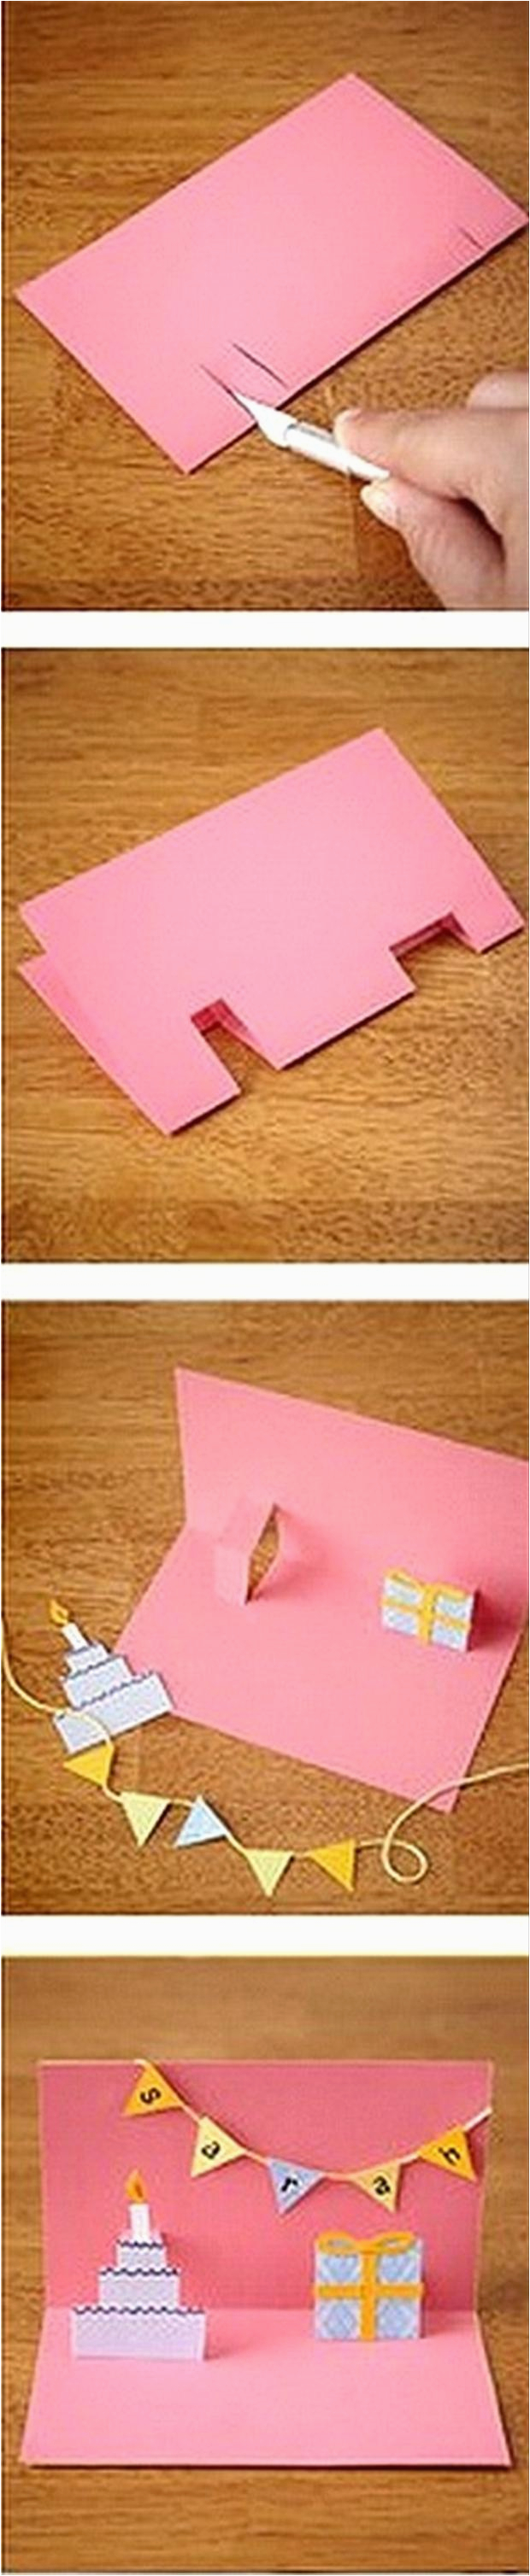 Easy Pop Up Cards for Birthdays Make A Pop Out Birthday Card Fun Crafts Dump A Day